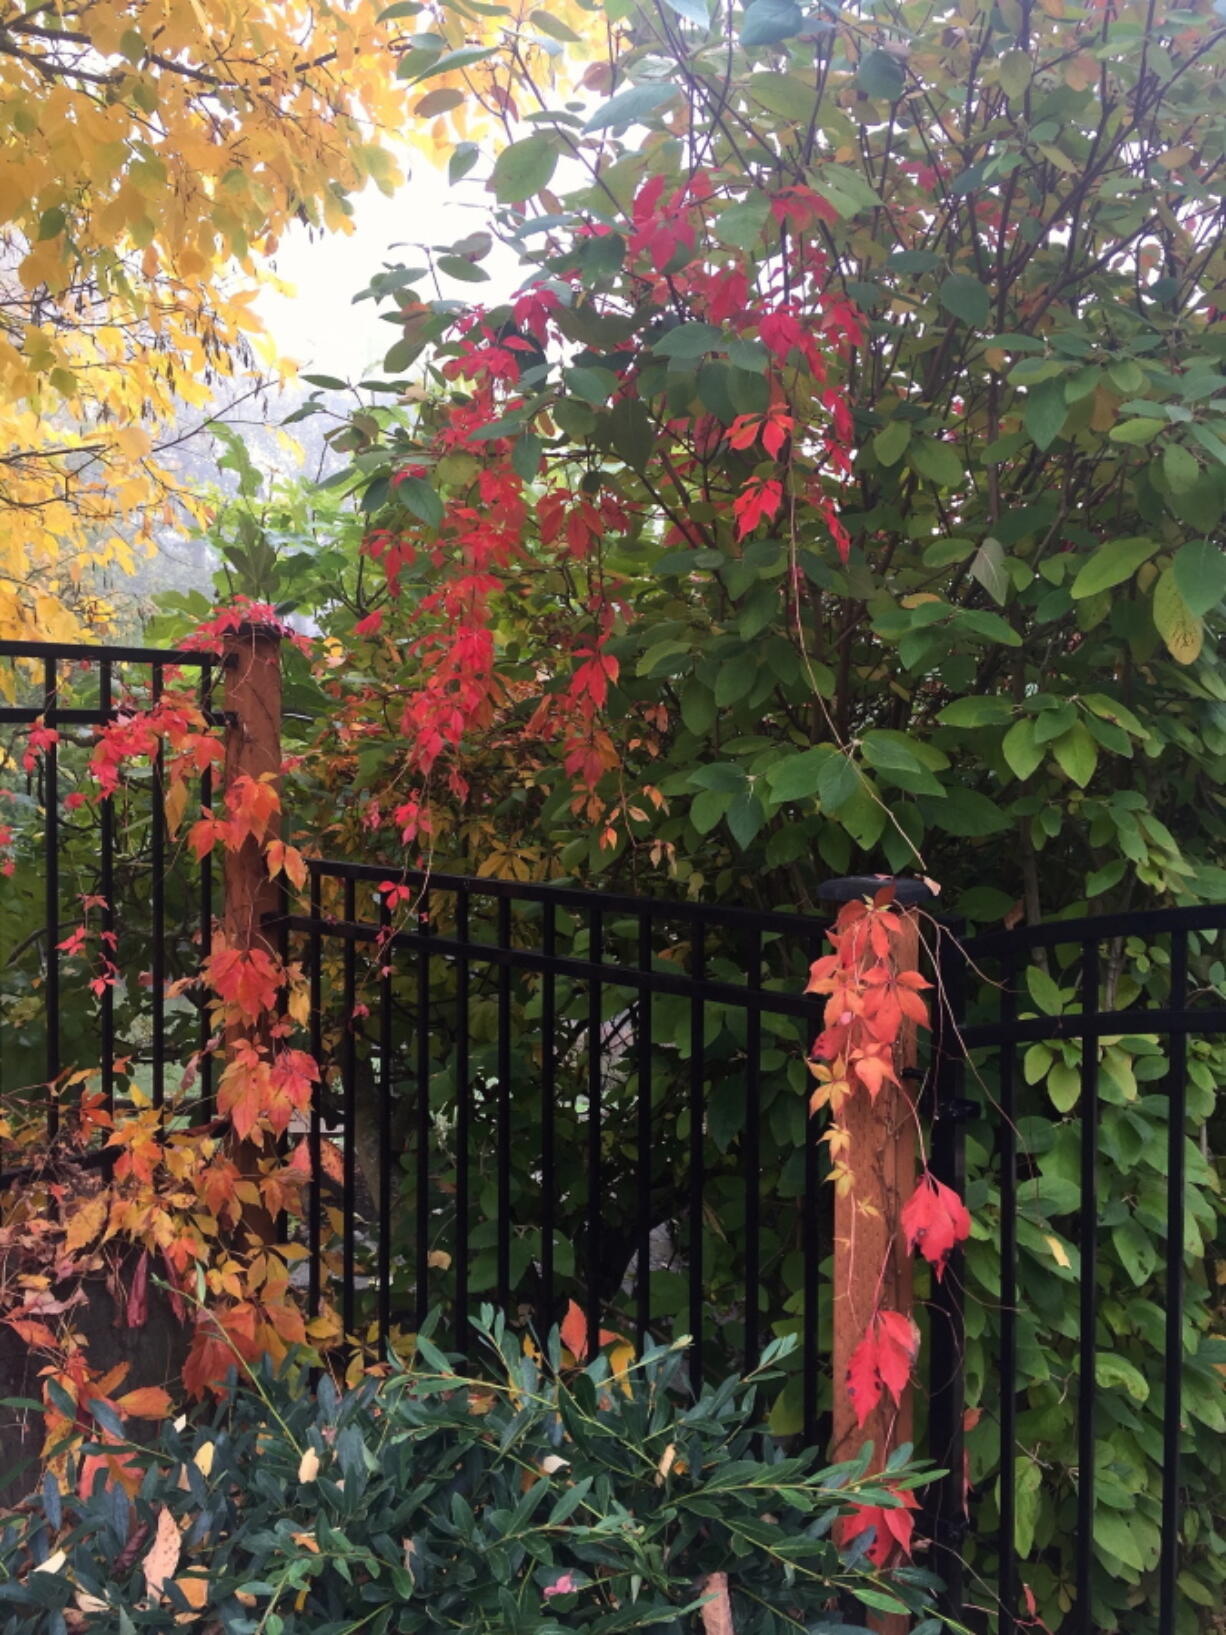 An ivy-covered fence near Langley underscores that there are no landscaping rules against blending different plant varieties or integrating them into commercial fencing.